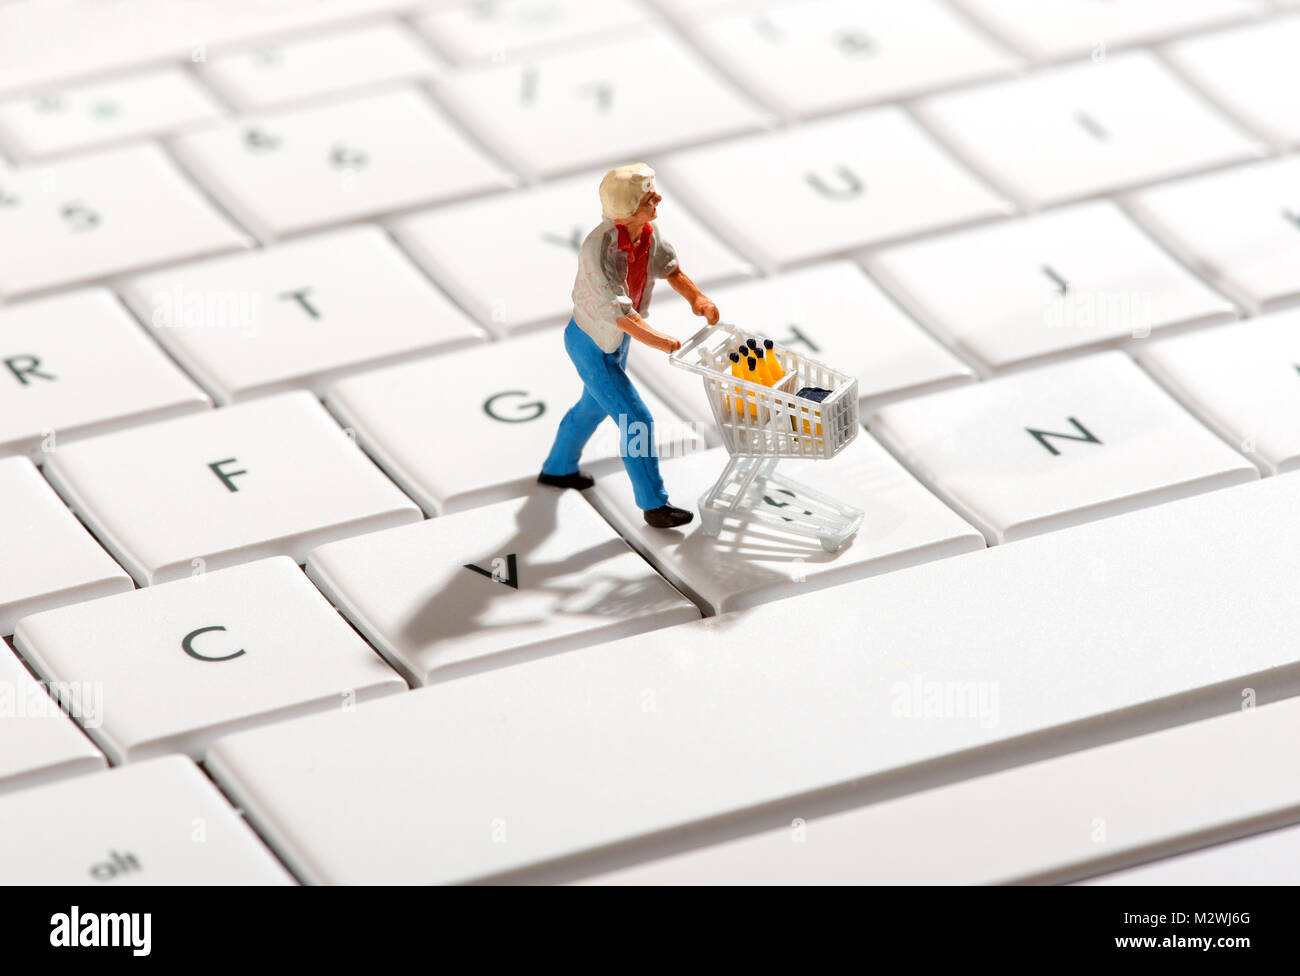 Miniature figurine of a shopper pushing a trolley over a computer keyboard in a concept of online or internet shopping Stock Photo